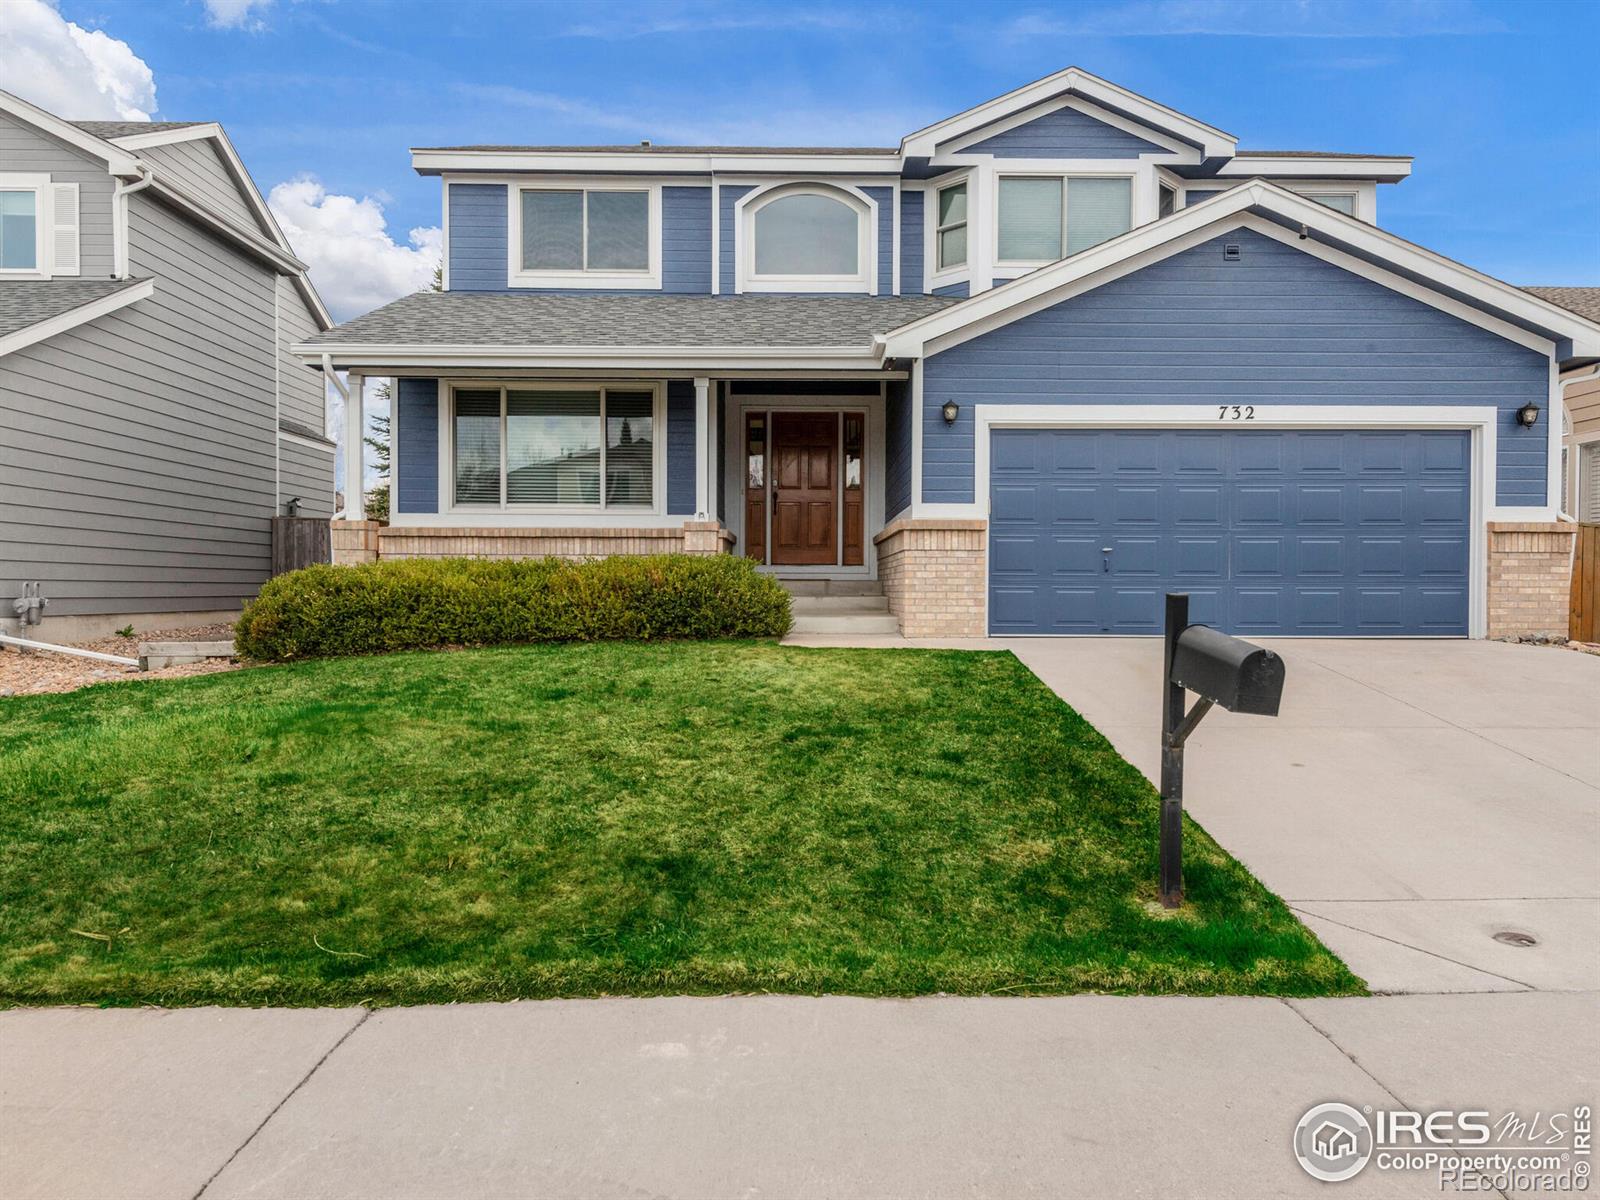 732 Orchard Drive, Louisville, CO 80027 - #: IR963376